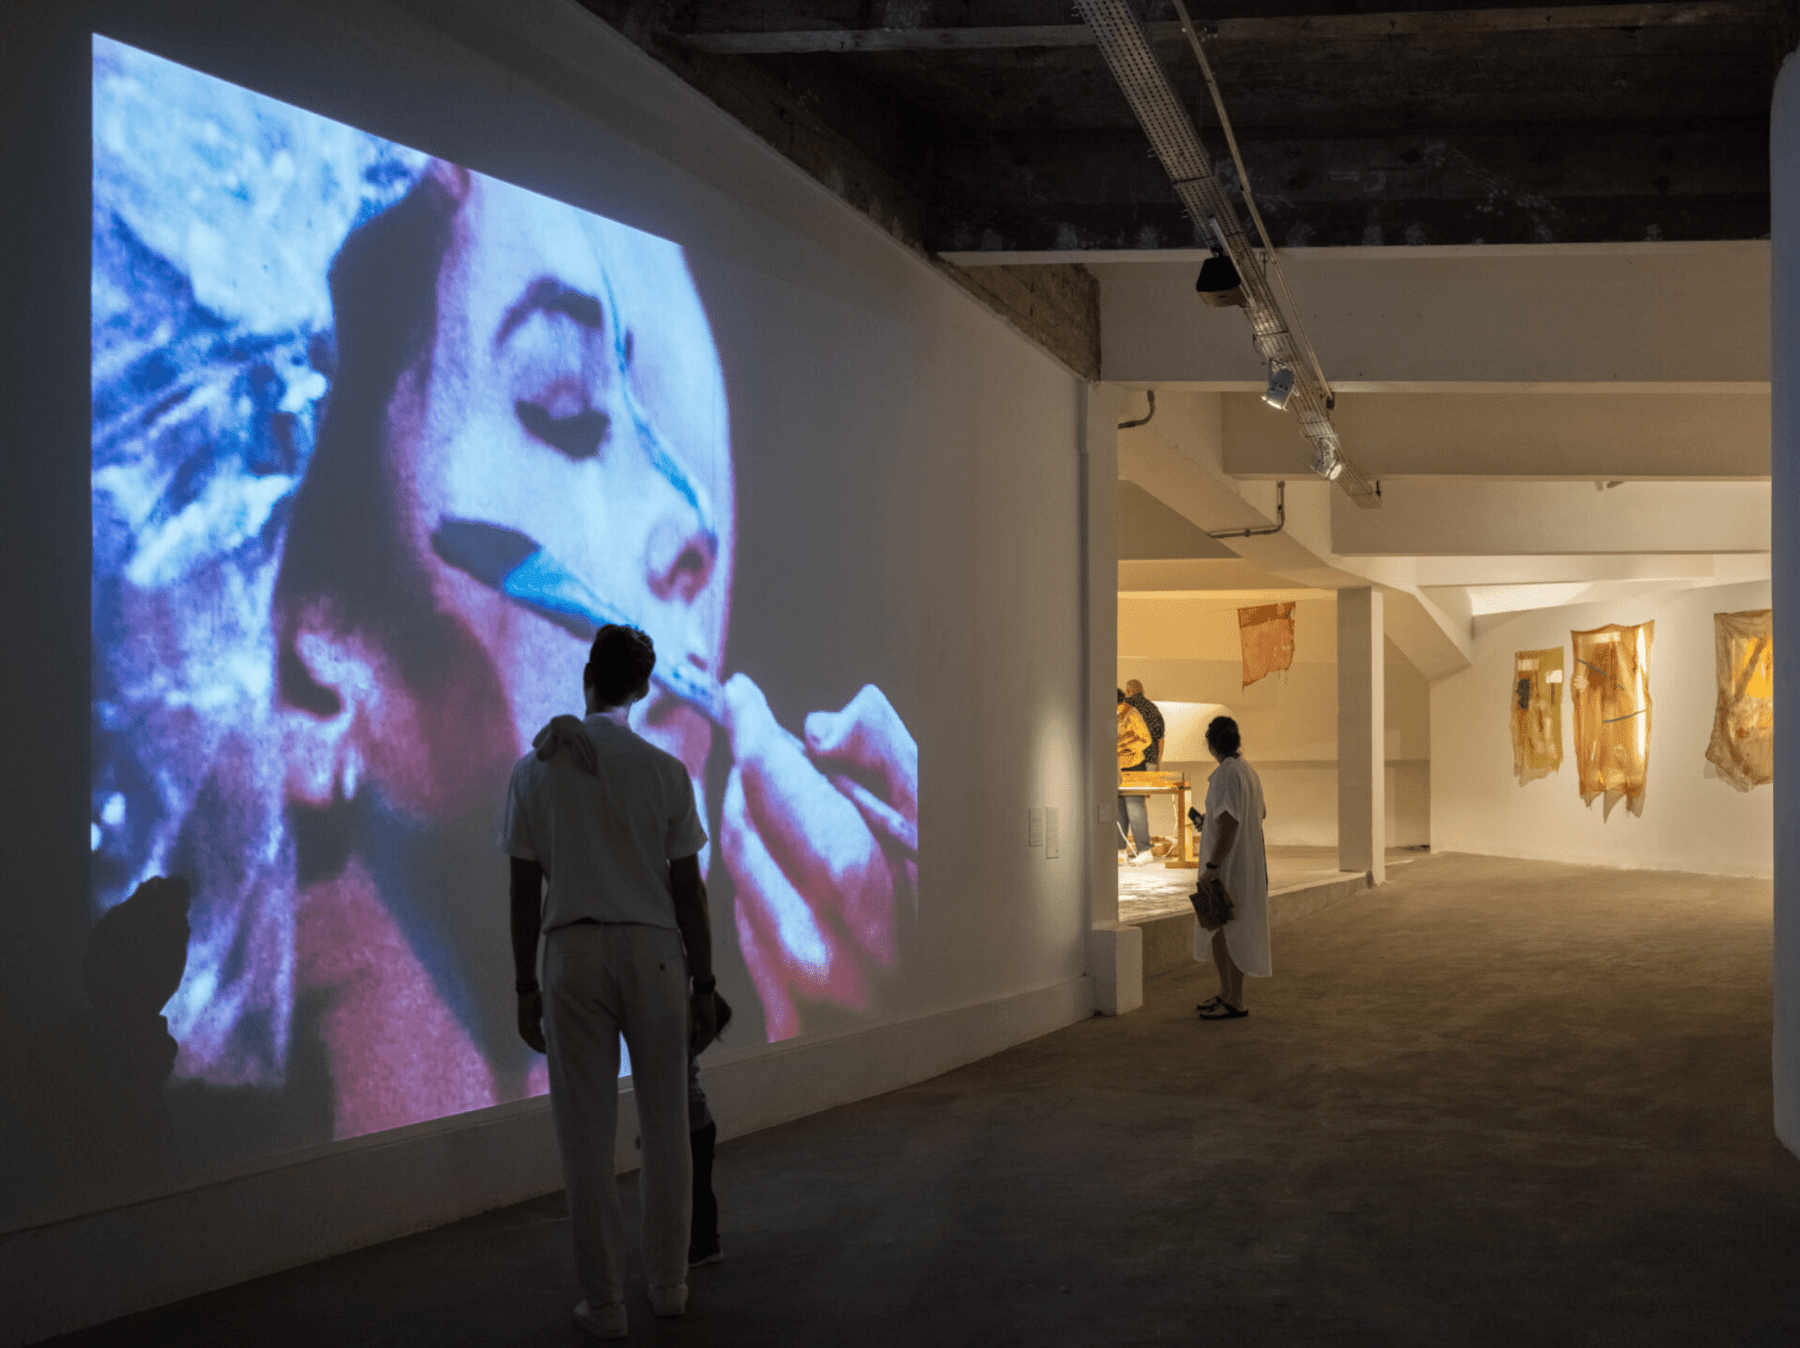 body-house: Dialogues between Carolee Schneemann, Diego Bianchi and Márcia Falcão - Pivô - Exhibitions - PPOW